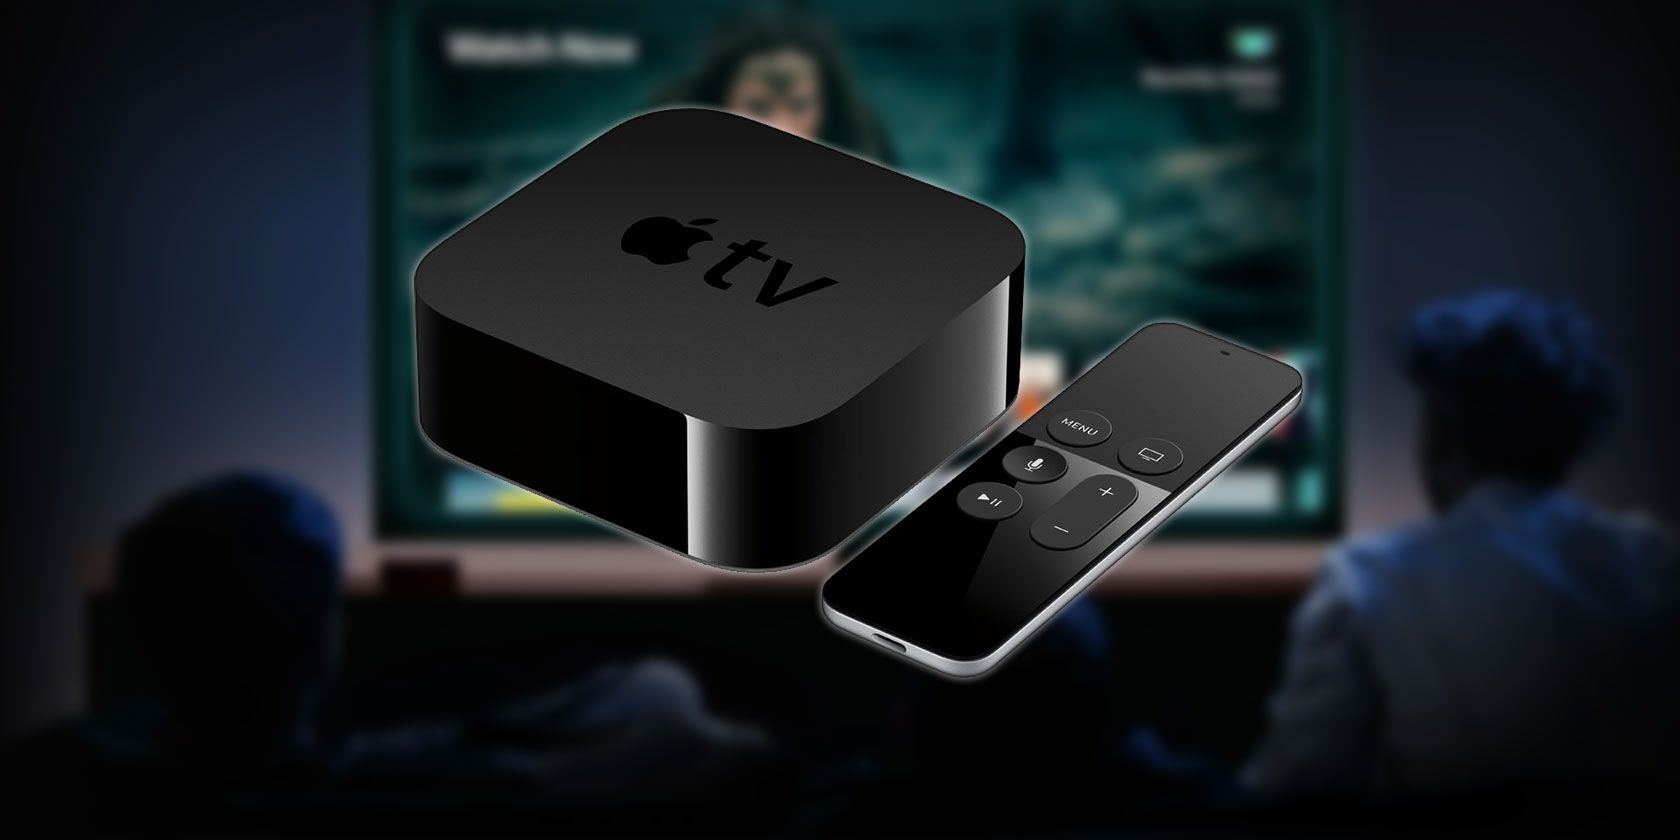 10 Tips to Get the Most Out of Your Apple TV